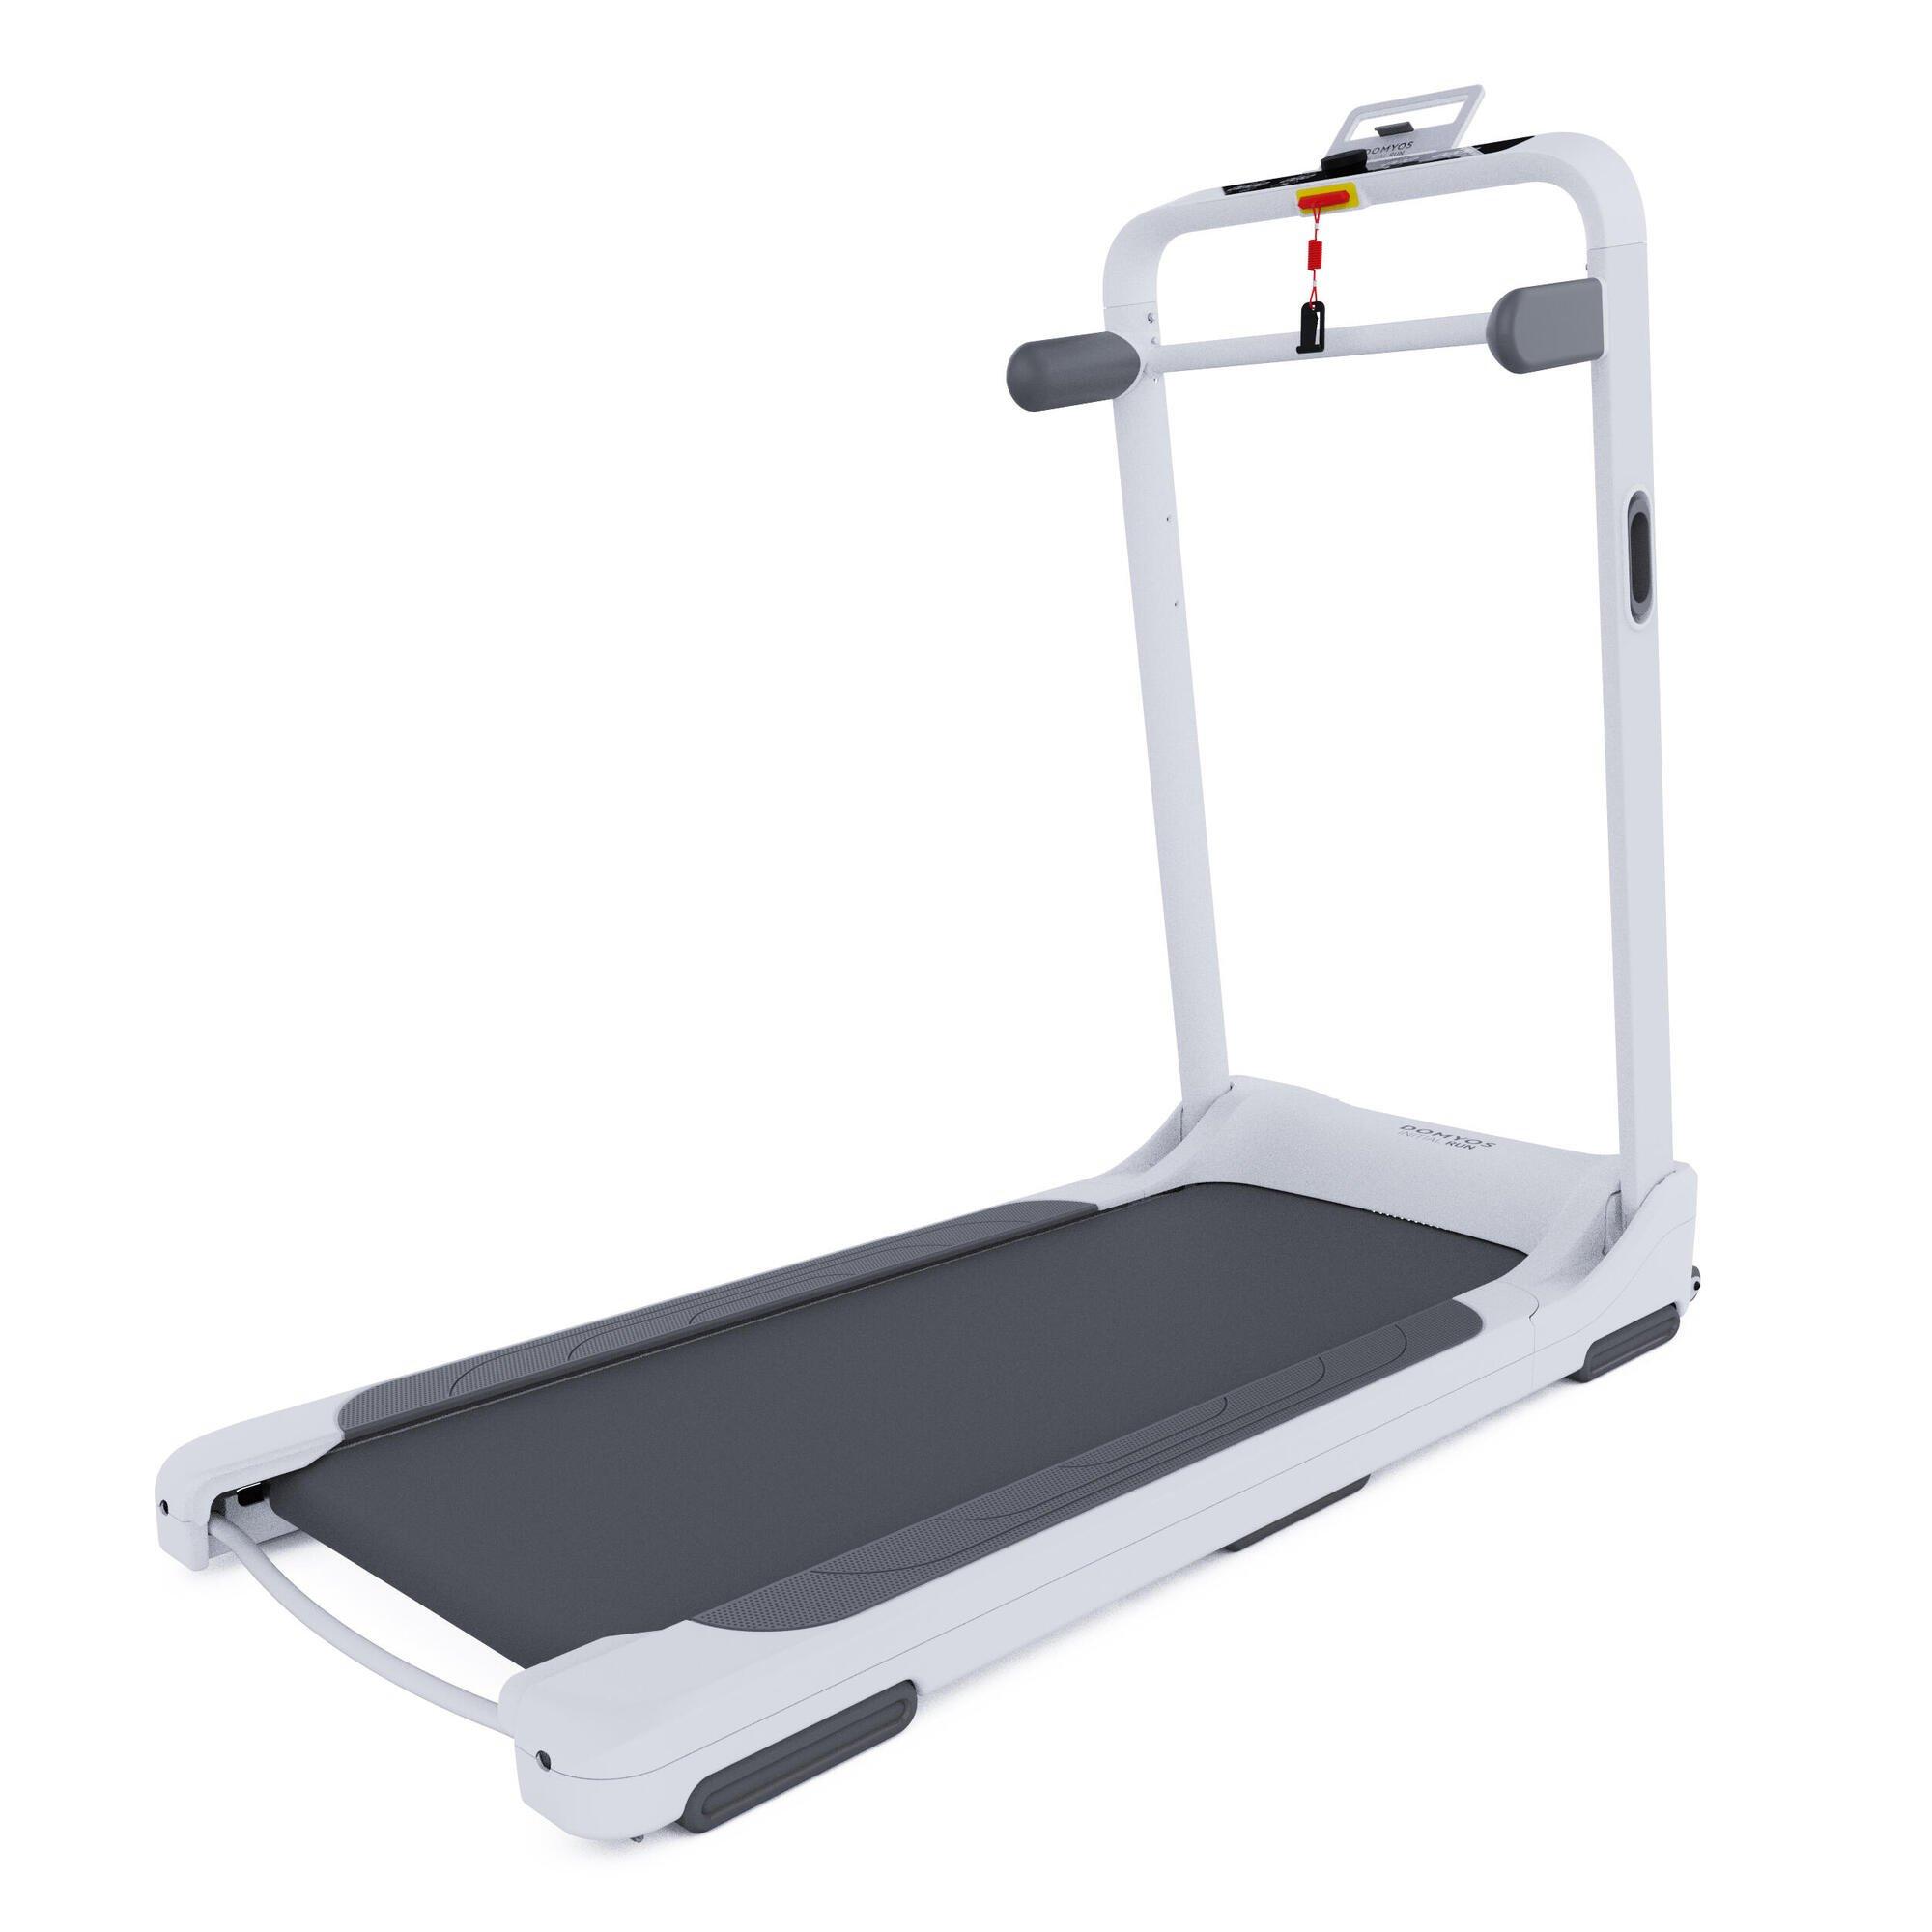 Decathlon Treadmill Initial Run Compact And Connected, 12 Km/H, 45 X 120 Cm, No Assembly